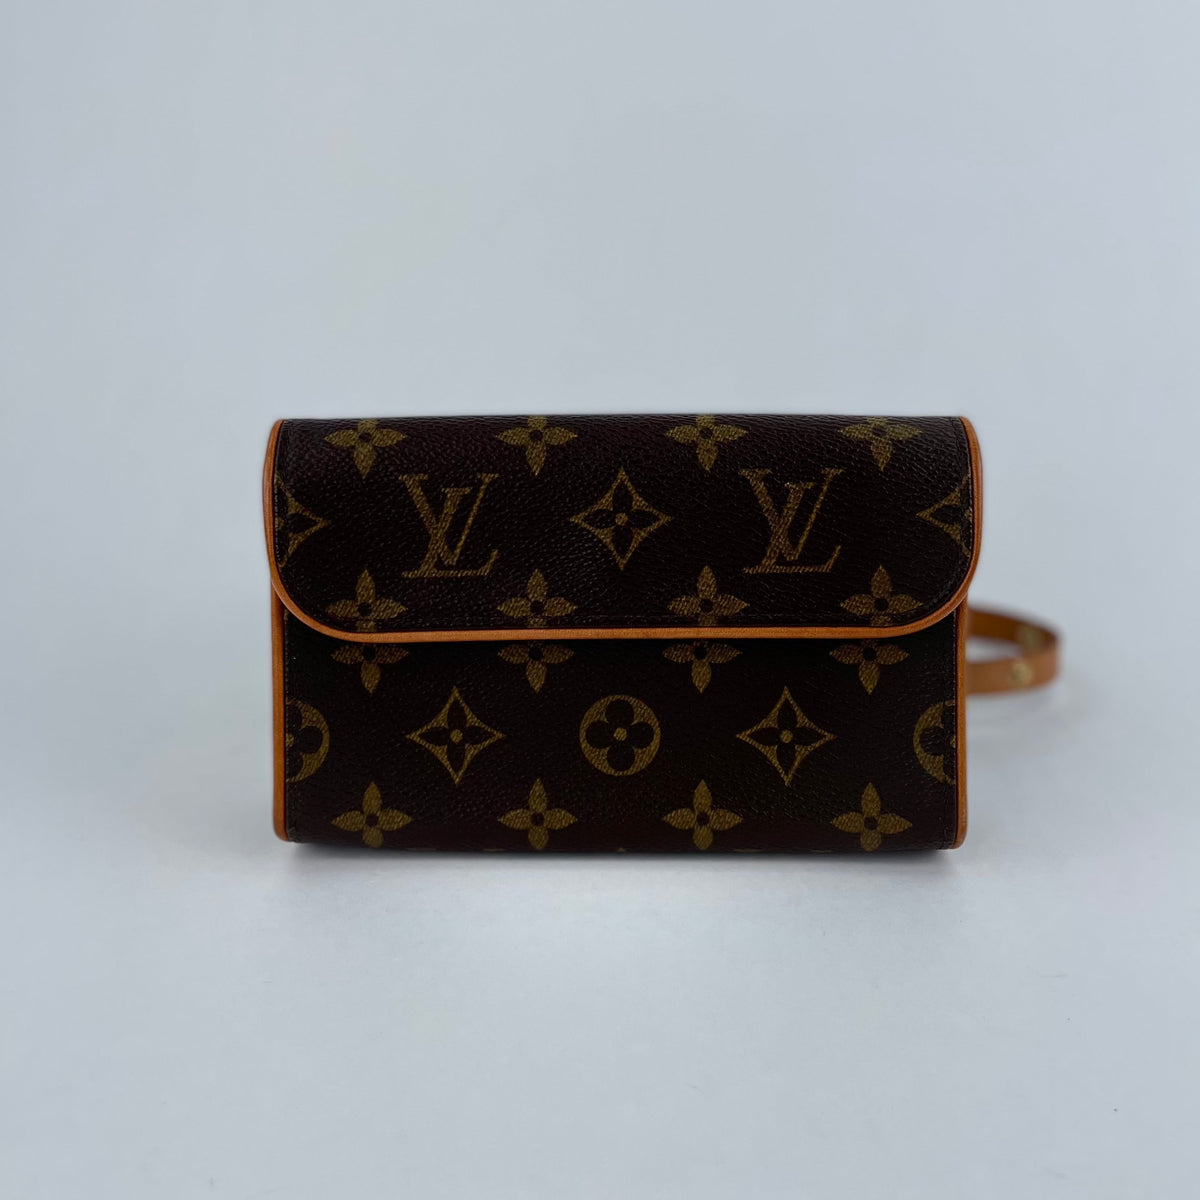 Louis Vuitton - PLEASE MESSAGE ME PRIOR TO PURCHASE - Depop